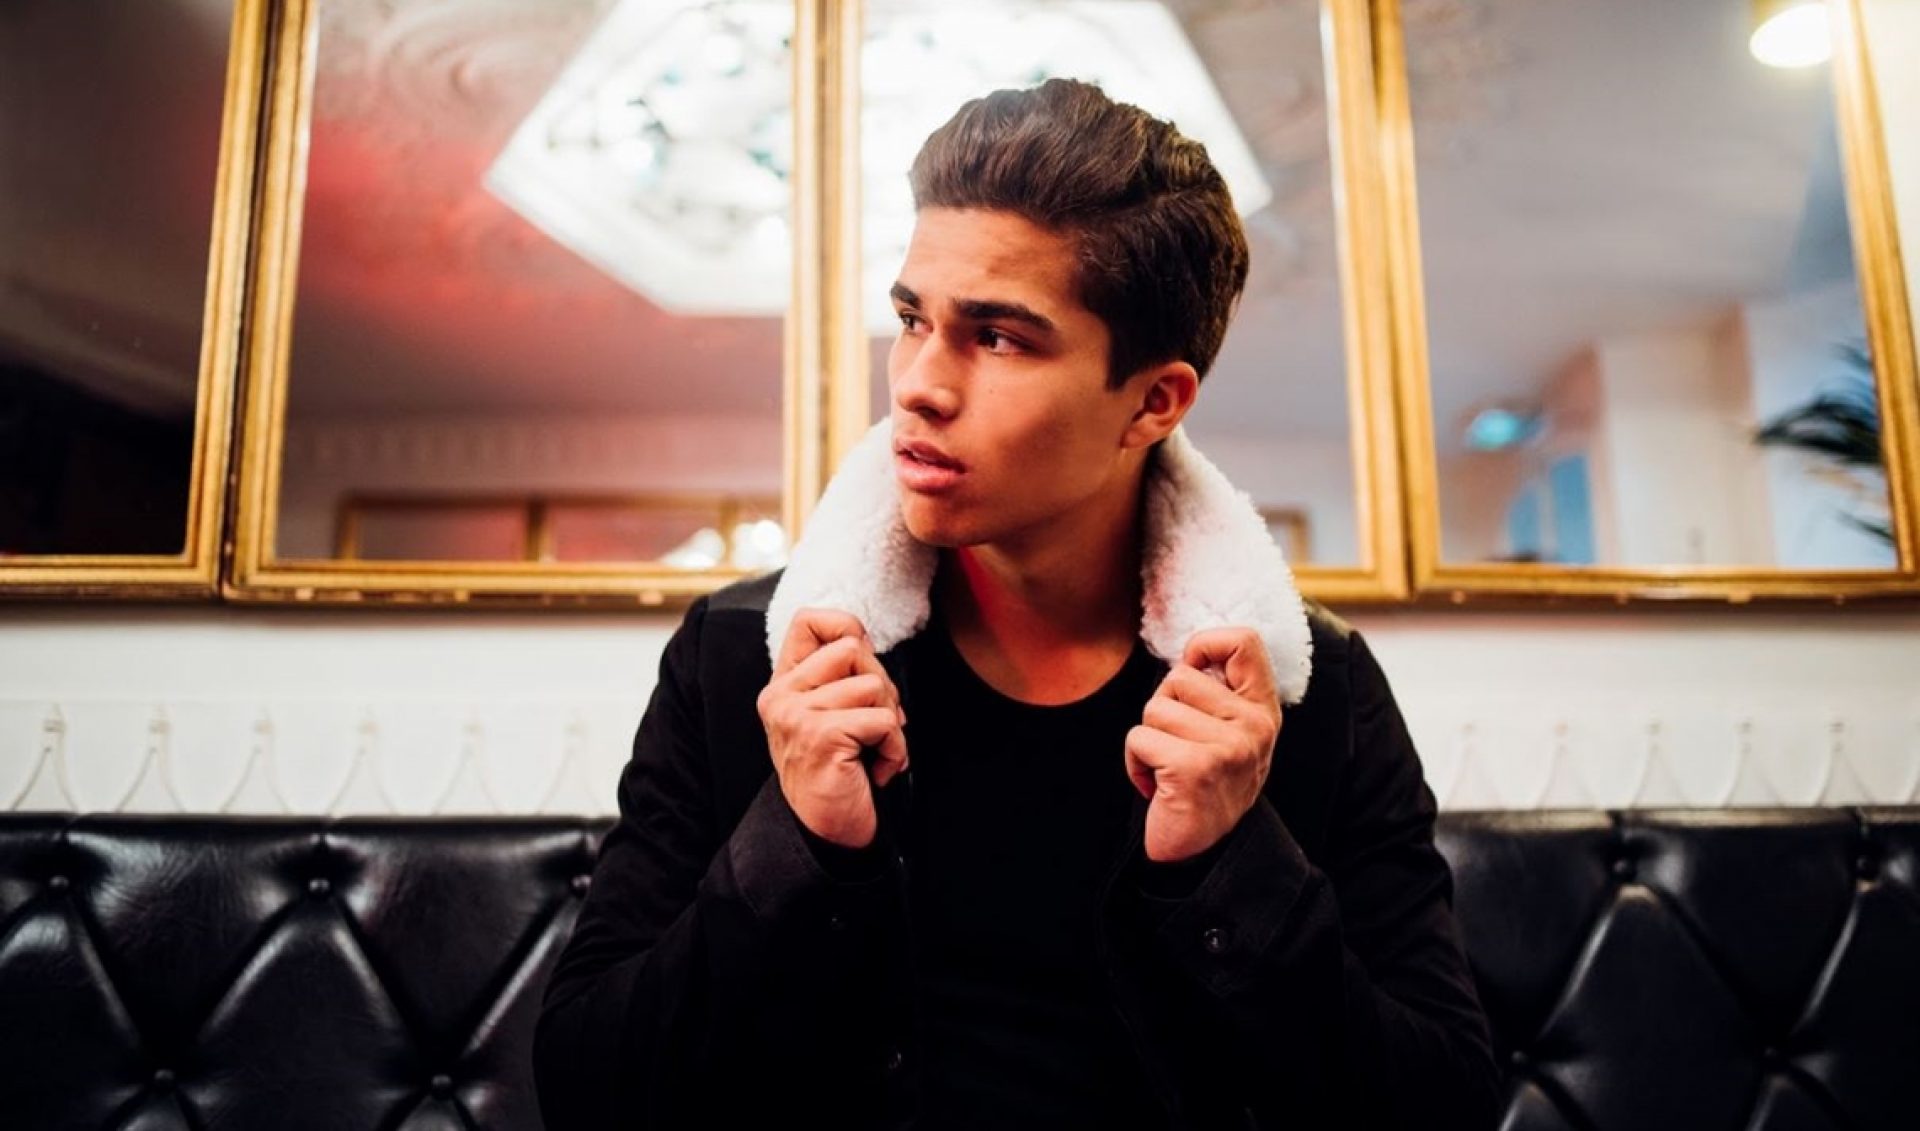 YouTube Musician, ‘Royal Crush’ Star Alex Aiono Signs With Spanish MCN 2btube